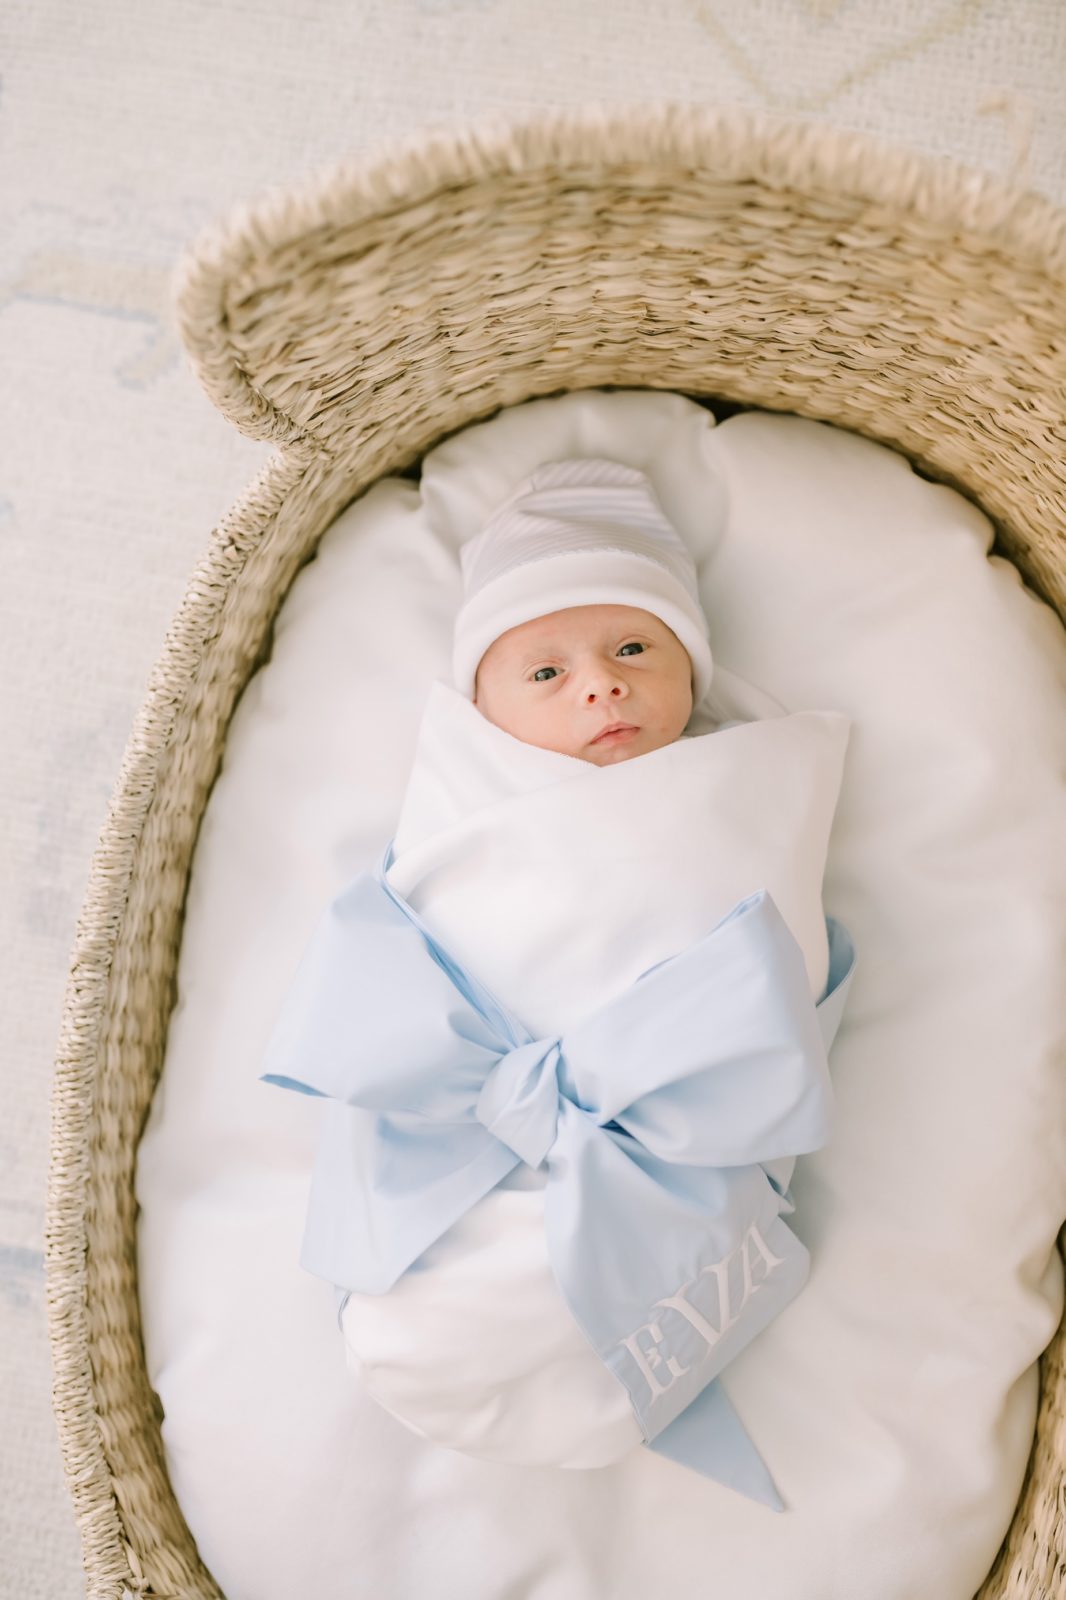 Newborn baby swaddled up with a bow wrapped around her captured by Christina Elliott Photography. bow around newborn baby girl #ChristinaElliottPhotography #ChristinaElliottNewborns #HoustonLifestyleNewborns #HoustonFamilyPhotographer